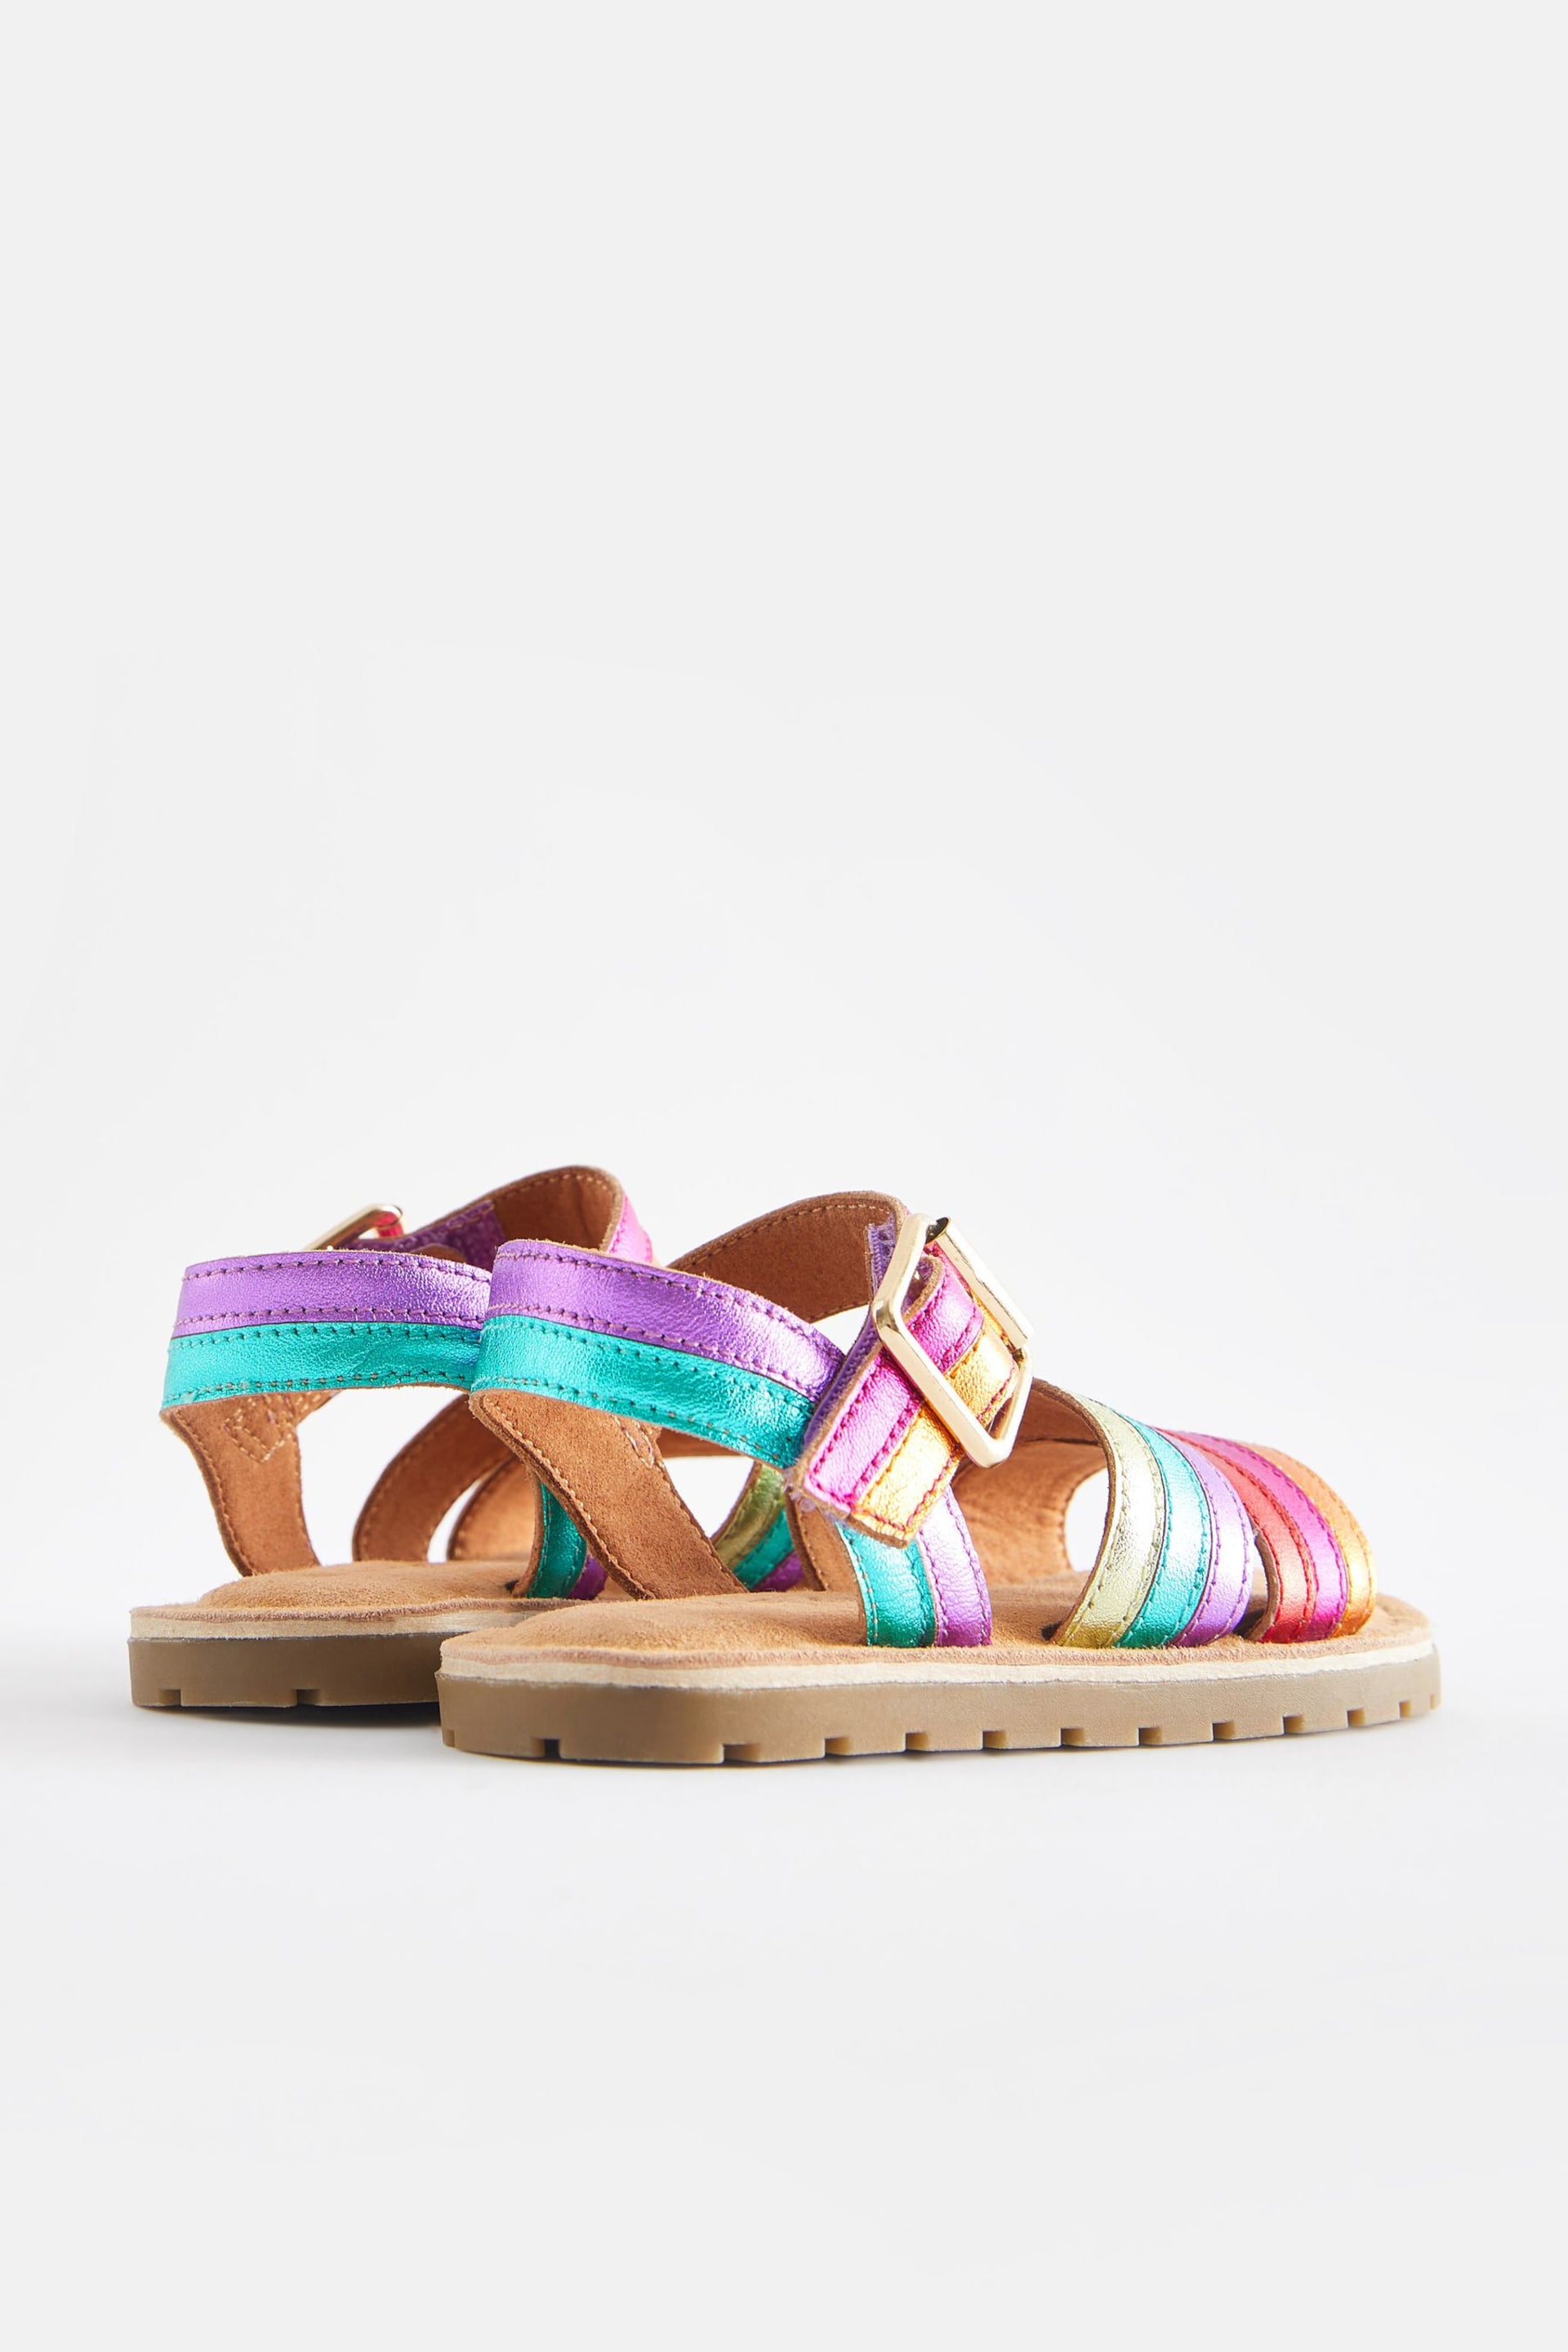 Multi Standard Fit (F) Leather Stripe Sandals - Image 3 of 5